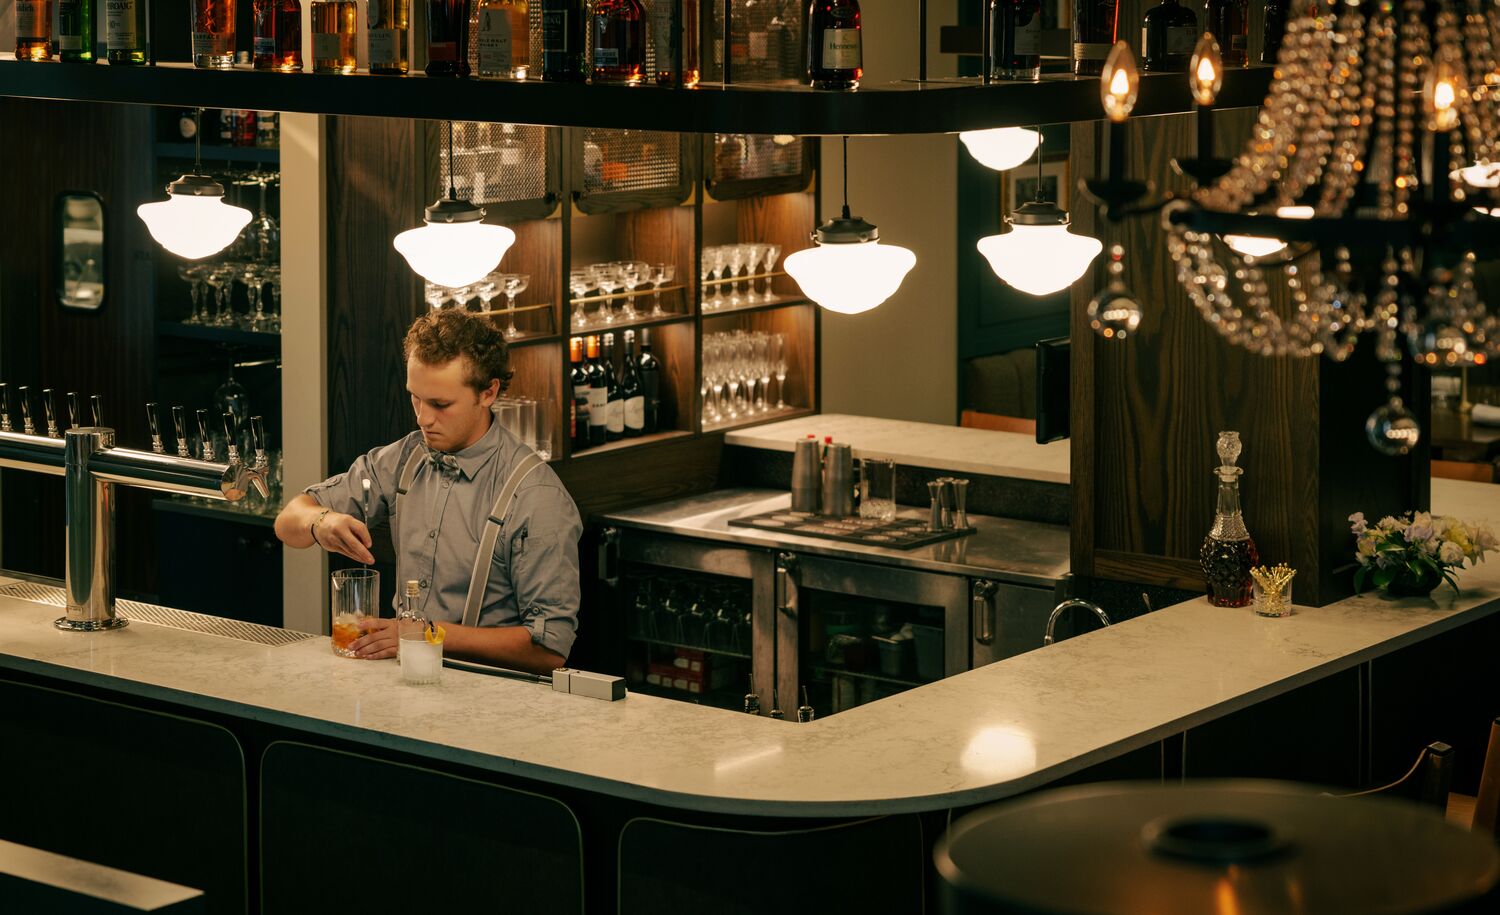 A bartender prepares drinks at Brazen, a restaurant located on Banff Ave in Banff National Park